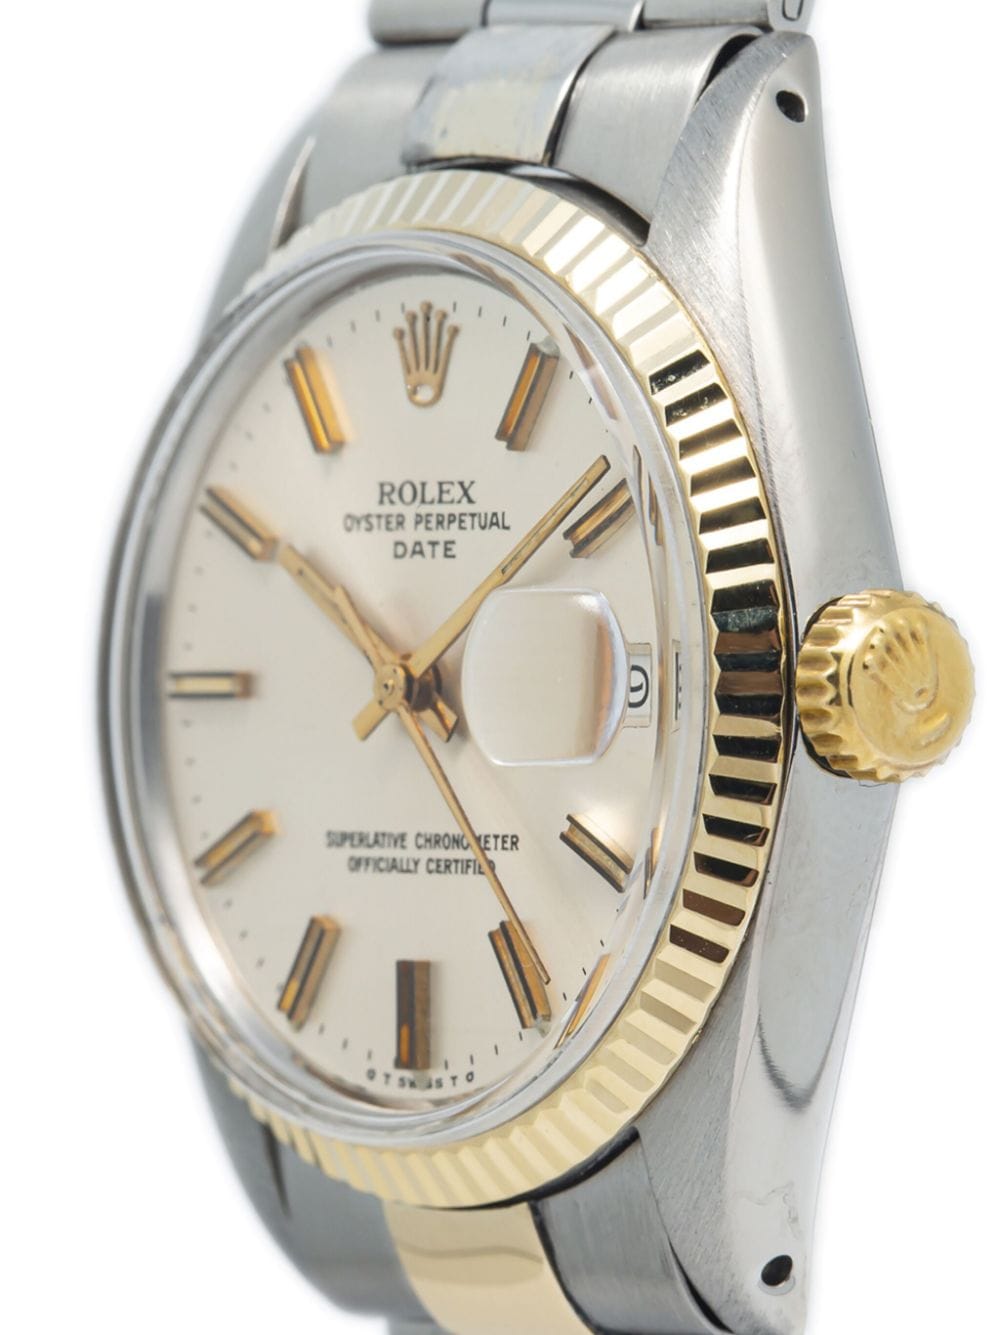 Pre-owned Rolex Oyster Perpetual Date 34毫米腕表（典藏款） In Gold